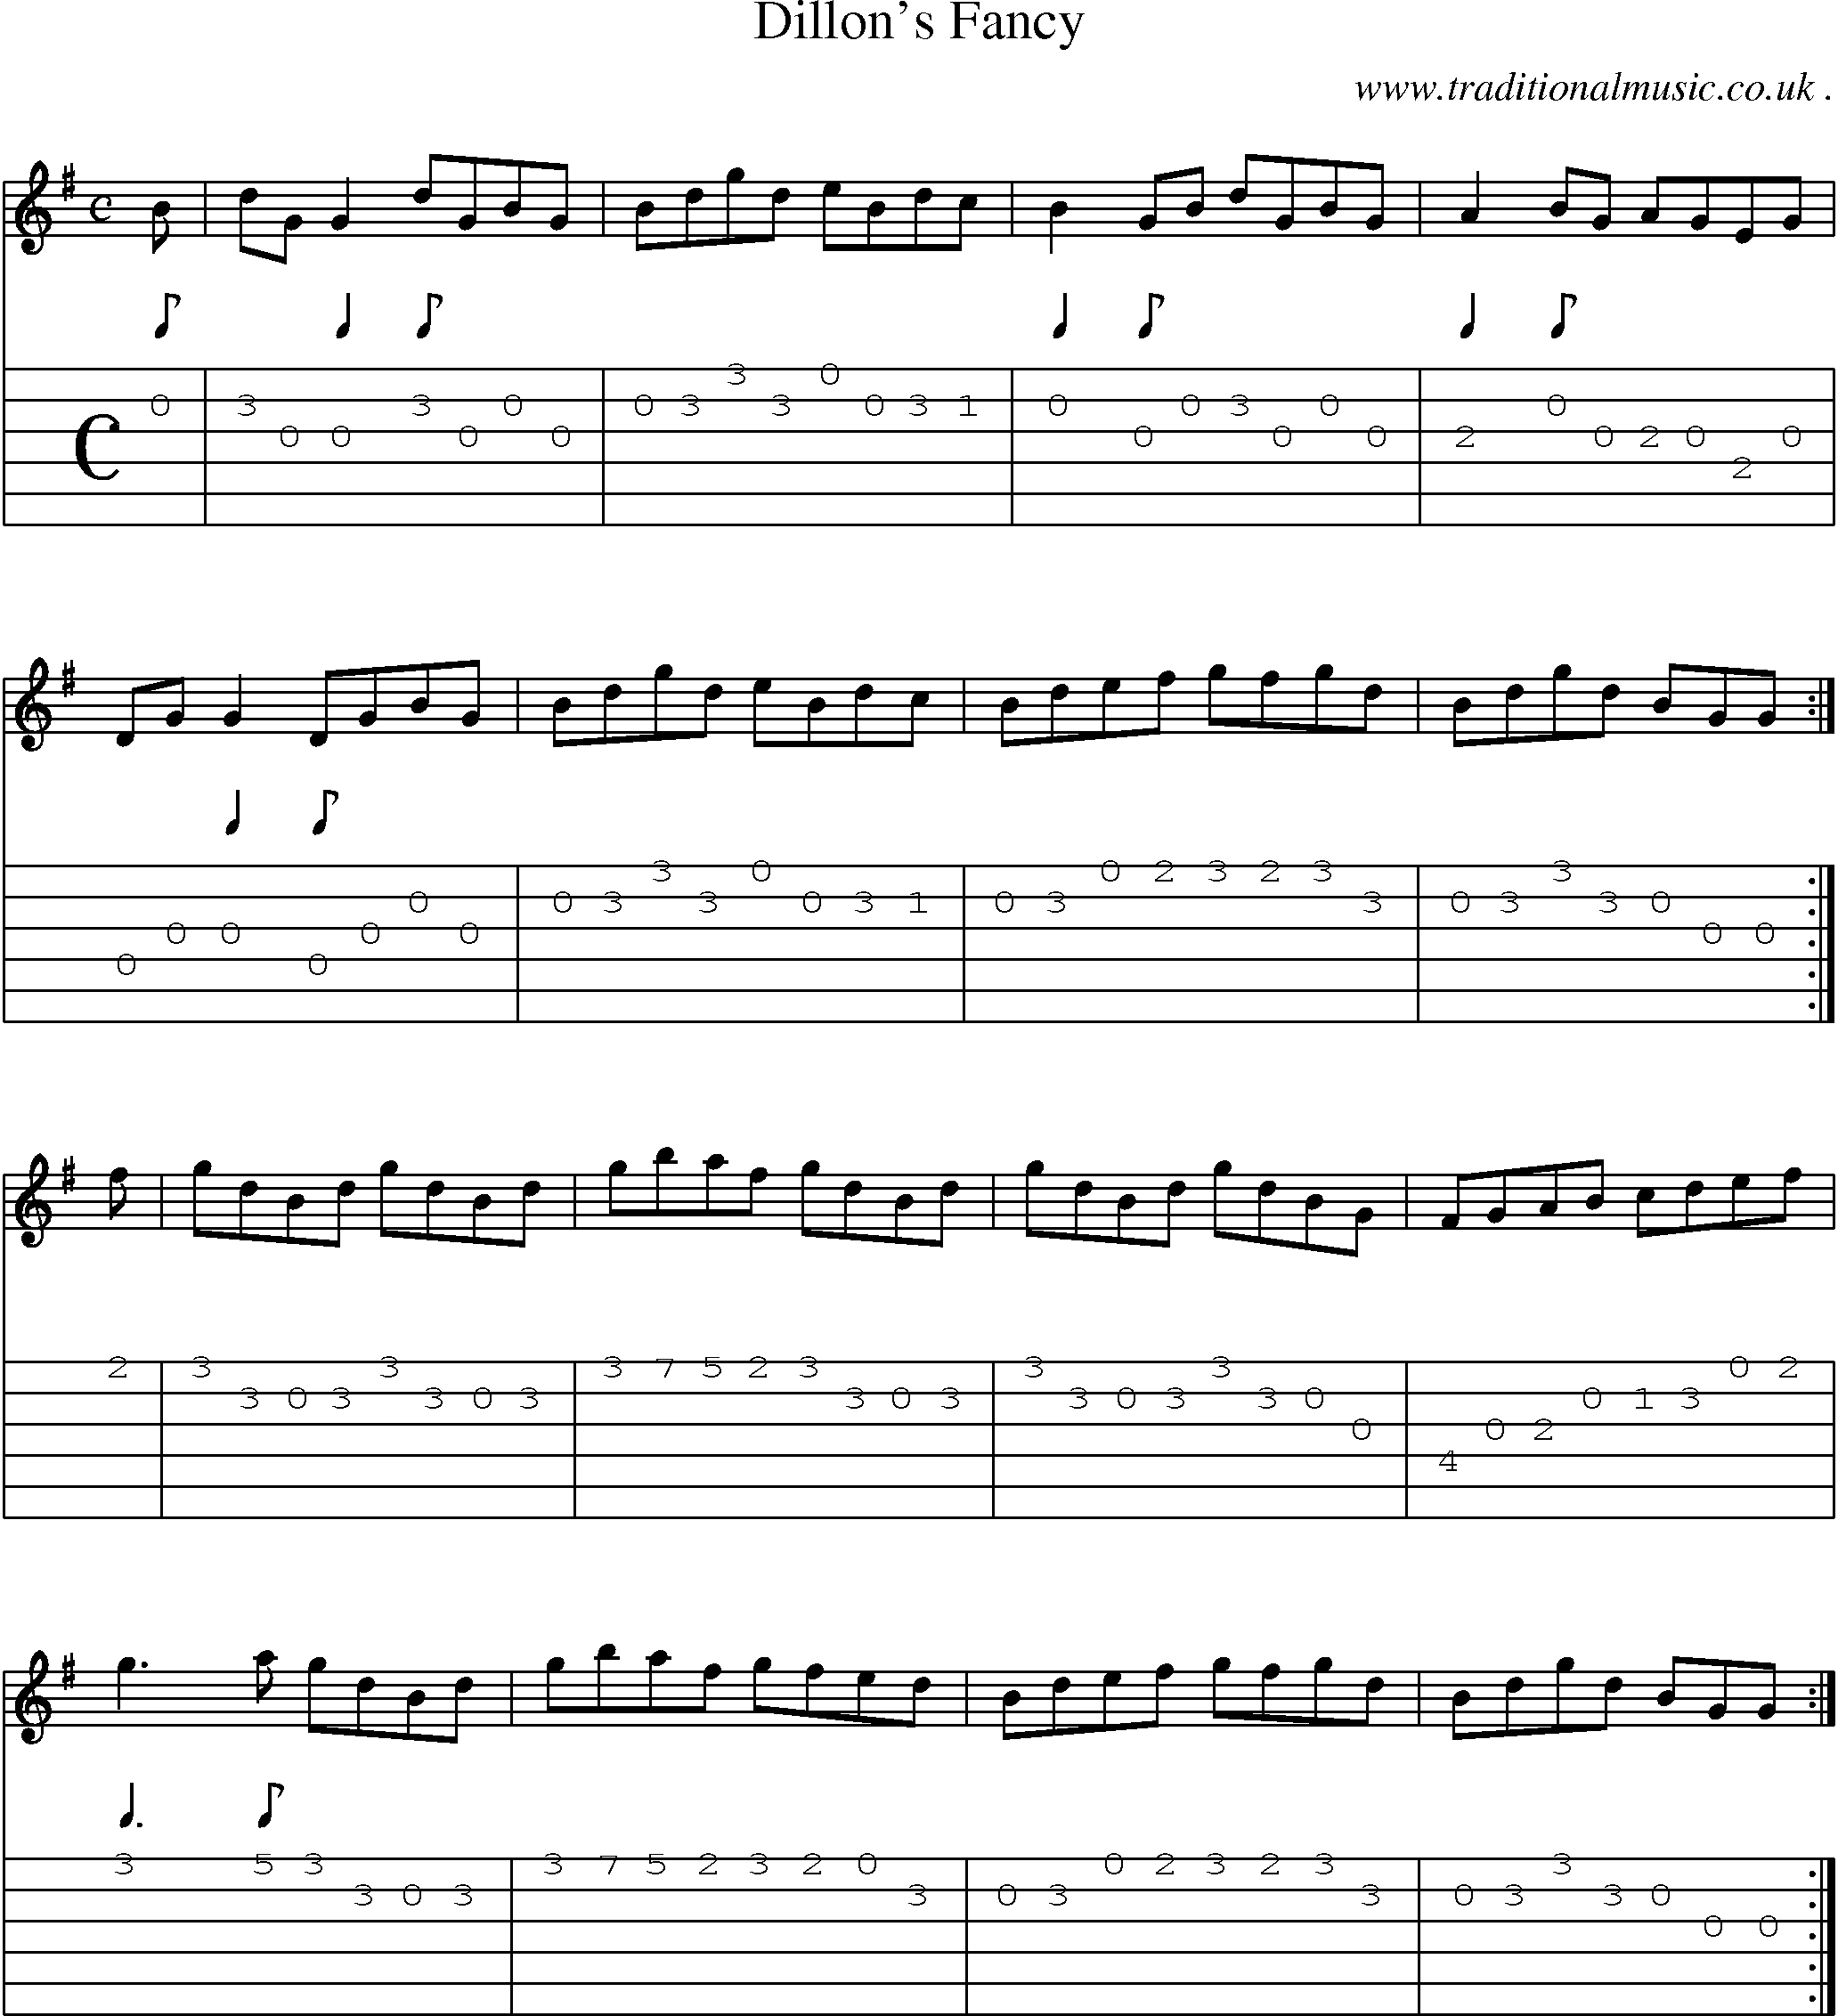 Sheet-Music and Guitar Tabs for Dillons Fancy